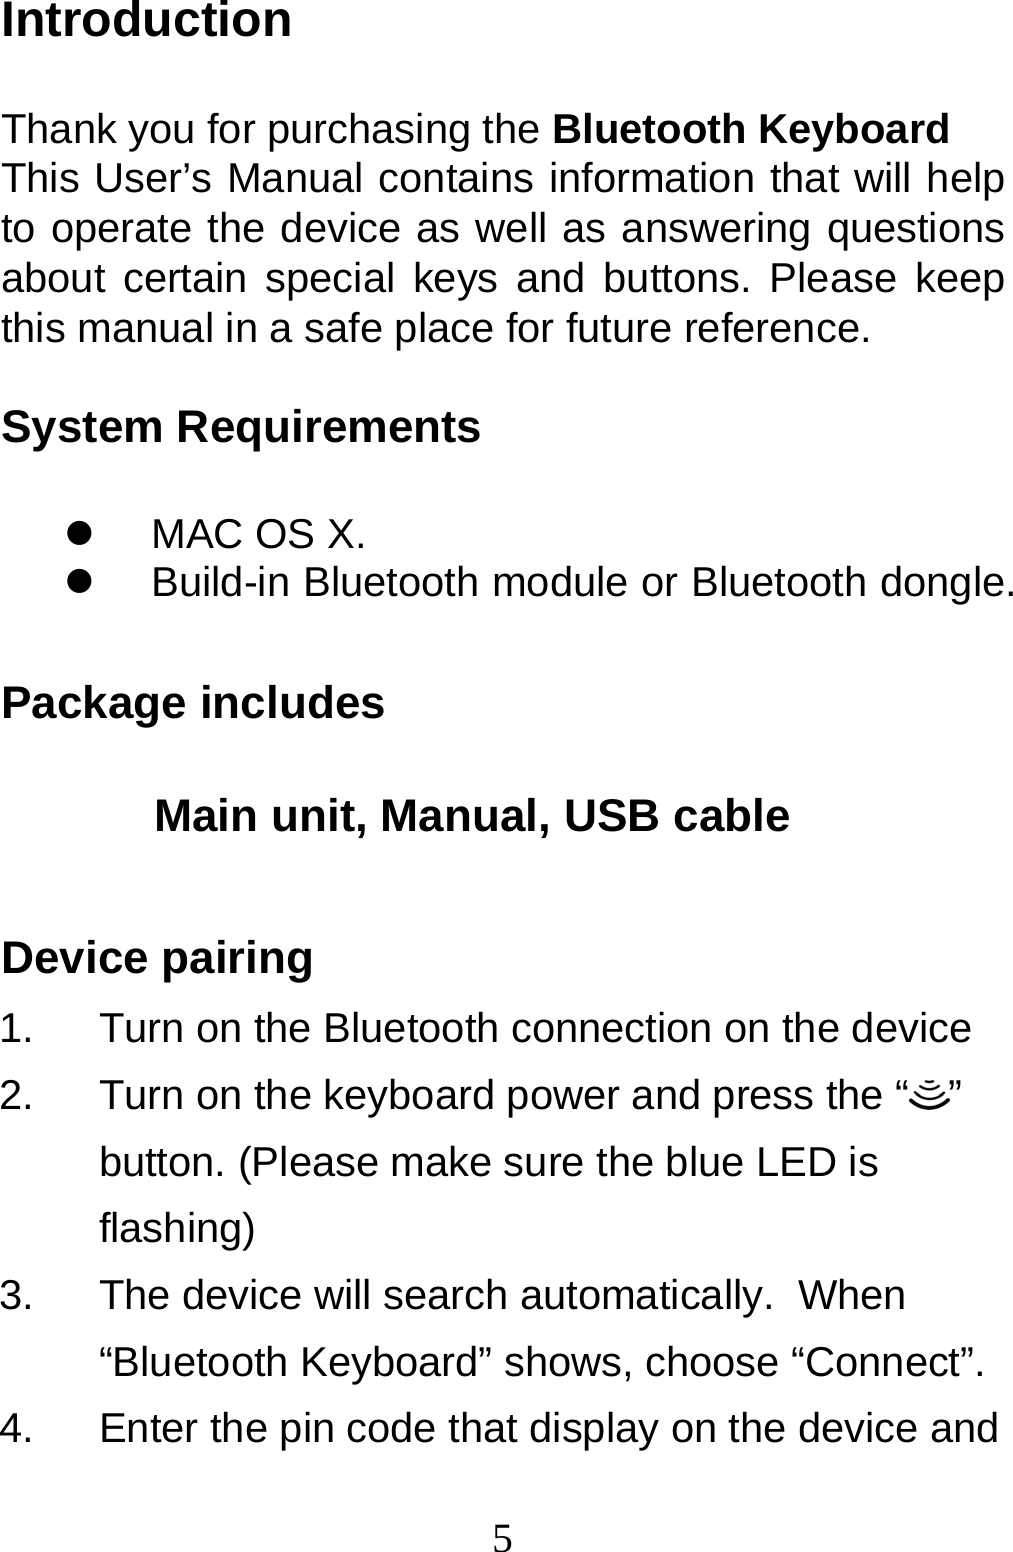  5Introduction  Thank you for purchasing the Bluetooth Keyboard This User’s Manual contains information that will help to operate the device as well as answering questions about certain special keys and buttons. Please keep this manual in a safe place for future reference.  System Requirements    MAC OS X.   Build-in Bluetooth module or Bluetooth dongle.  Package includes                          Main unit, Manual, USB cable  Device pairing 1.  Turn on the Bluetooth connection on the device 2.  Turn on the keyboard power and press the “ ” button. (Please make sure the blue LED is flashing) 3.  The device will search automatically.  When “Bluetooth Keyboard” shows, choose “Connect”. 4.  Enter the pin code that display on the device and 